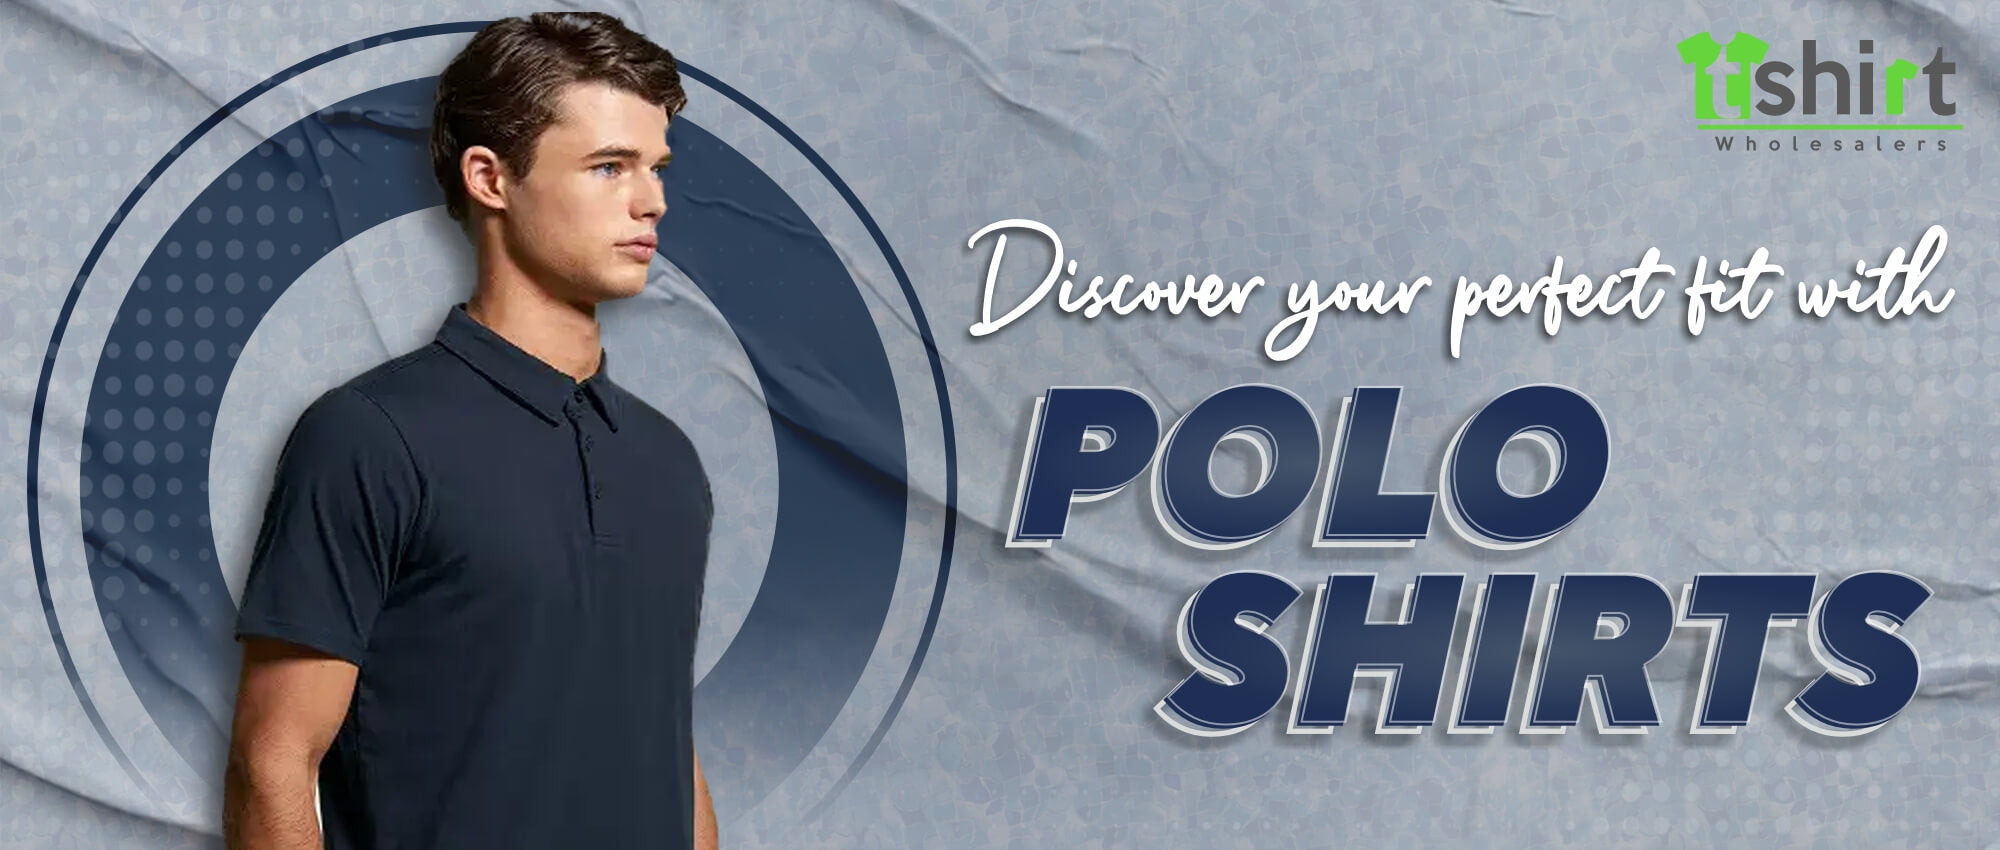 DISCOVER YOUR PERFECT FIT WITH POLO SHIRTS